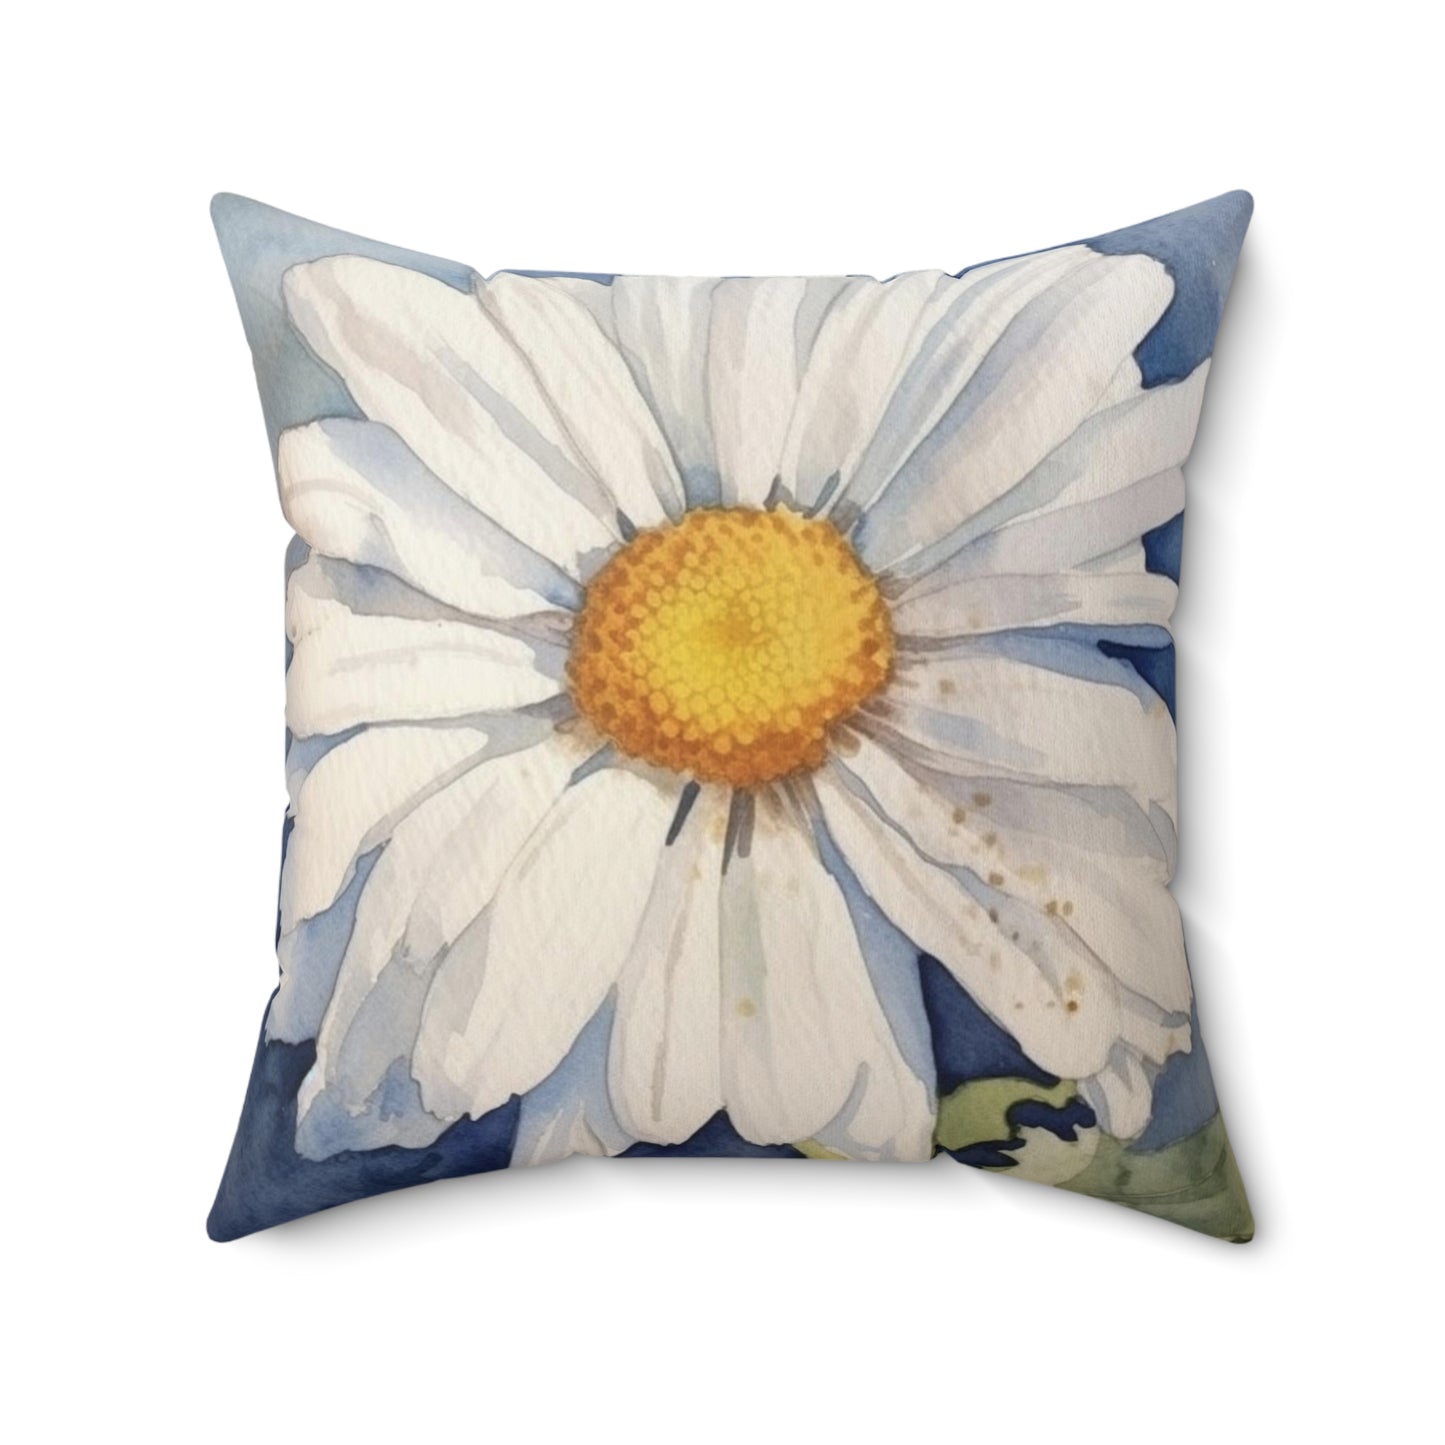 Daisy Filled Pillow with Insert, Floral White Flower Square Throw Accent Decorative Room Decor Floor Sofa Couch Cushion Starcove Fashion